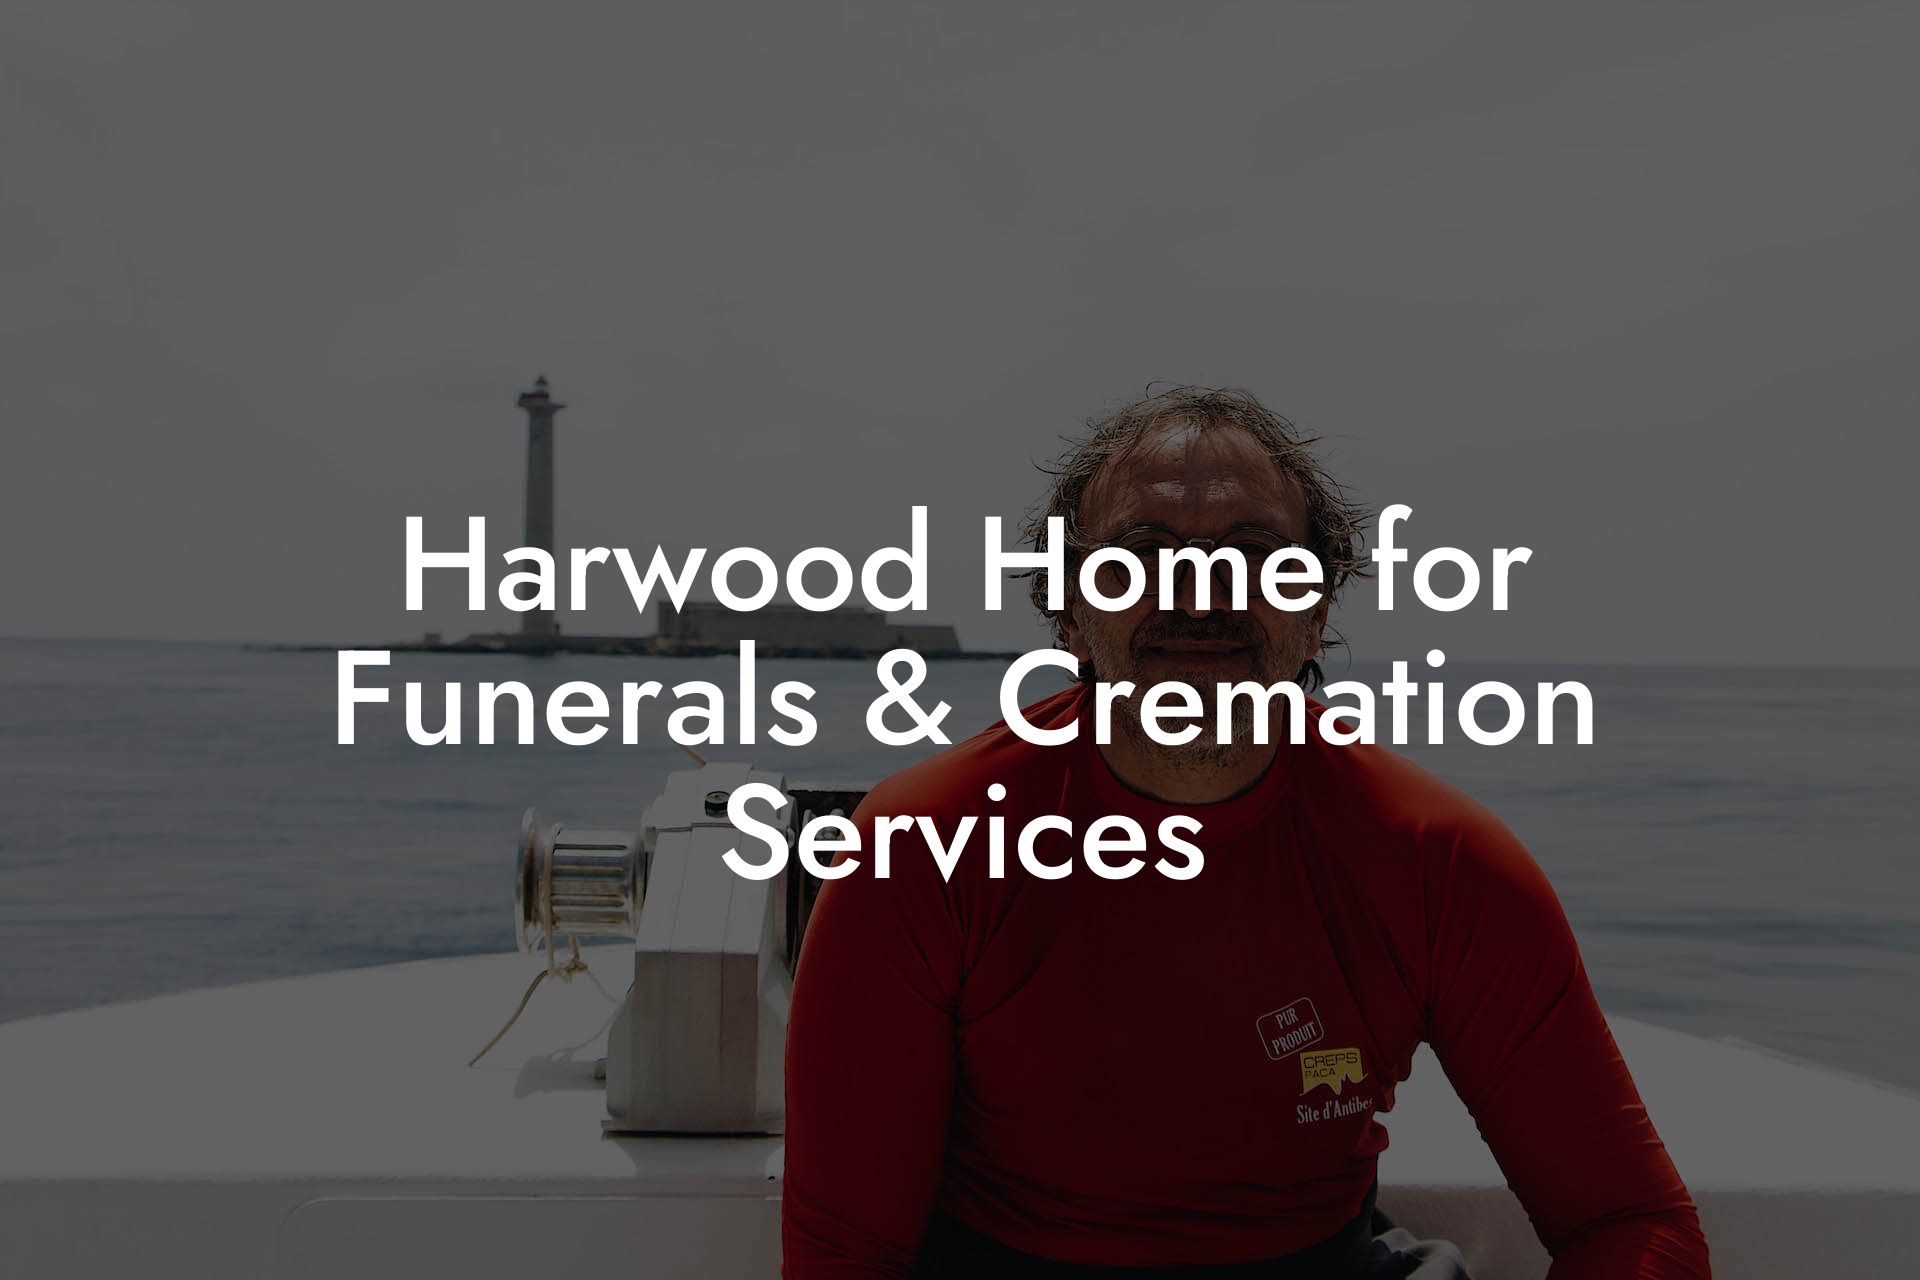 Harwood Home for Funerals & Cremation Services